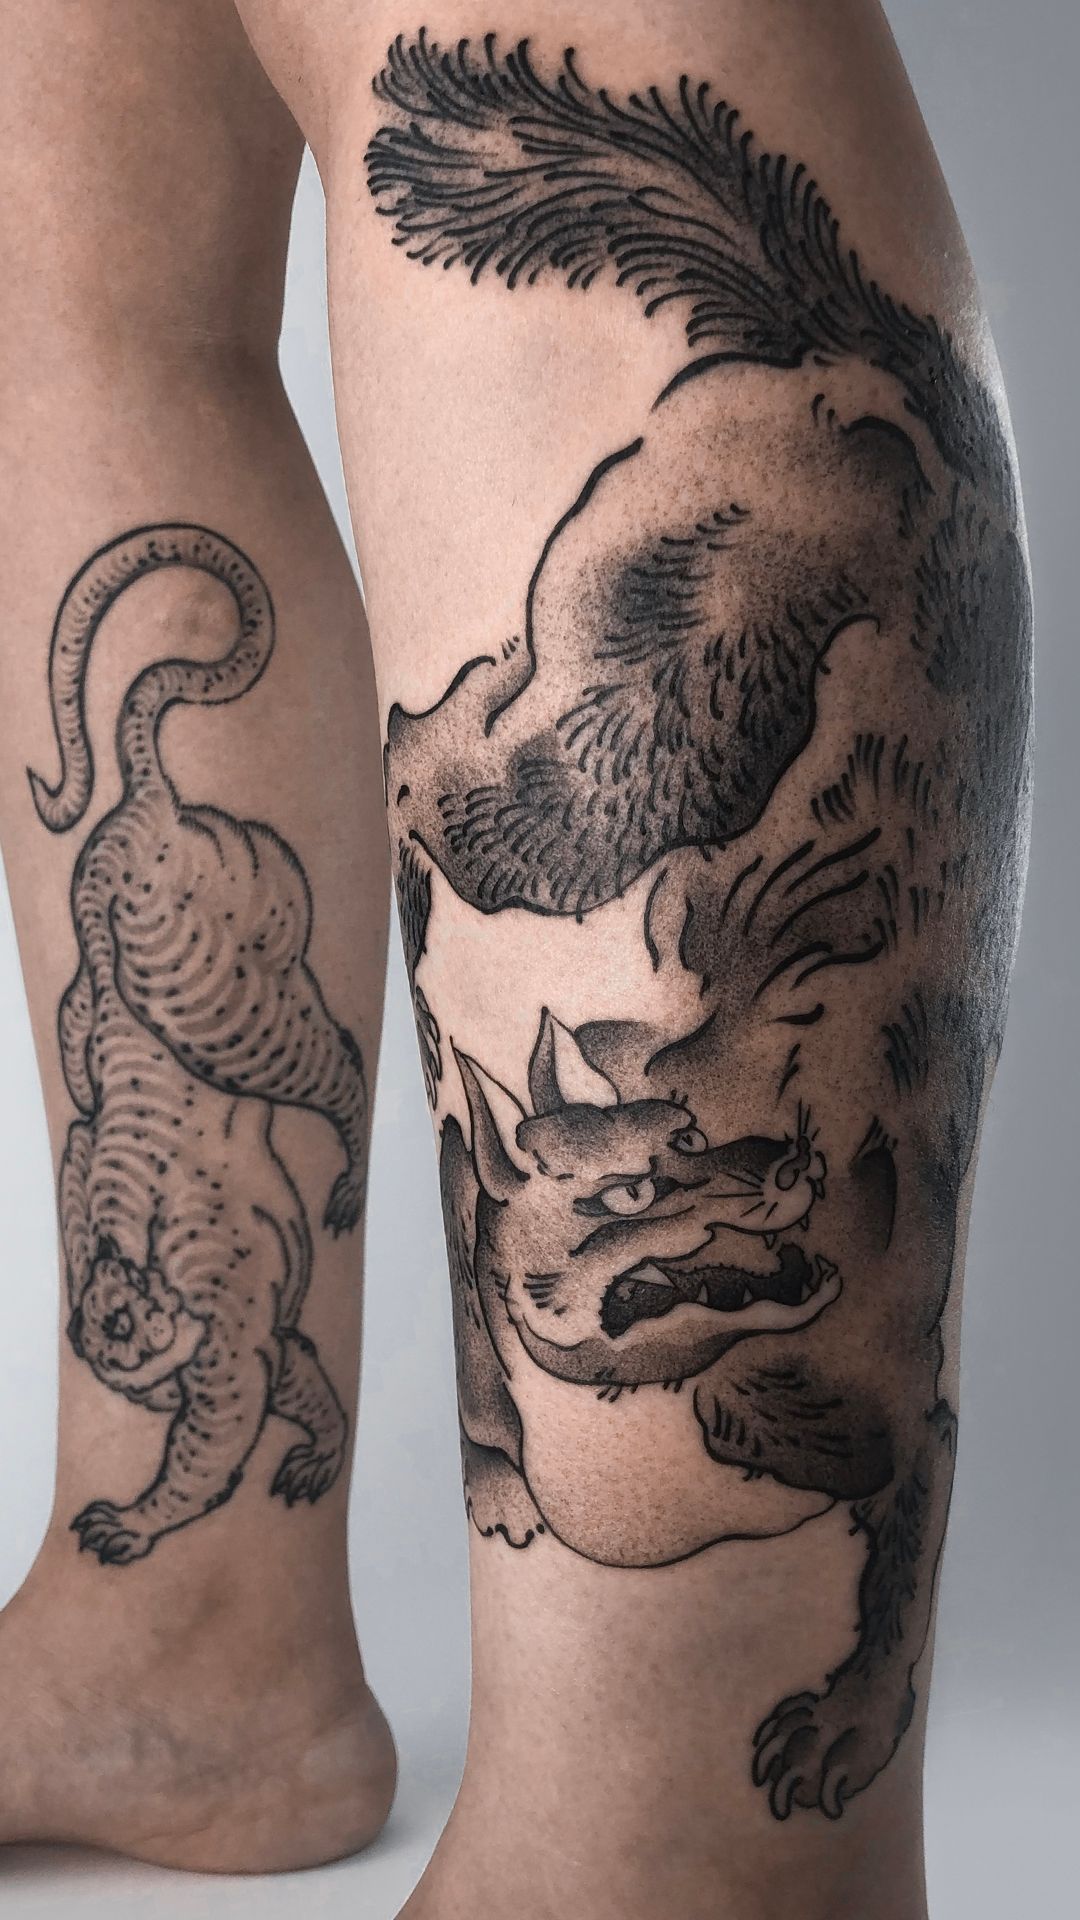 American traditional take on a displacer beast from D&D, by Dennis Cooper  at Acworth Tattoo Company in Acworth, GA, USA. : r/tattoos